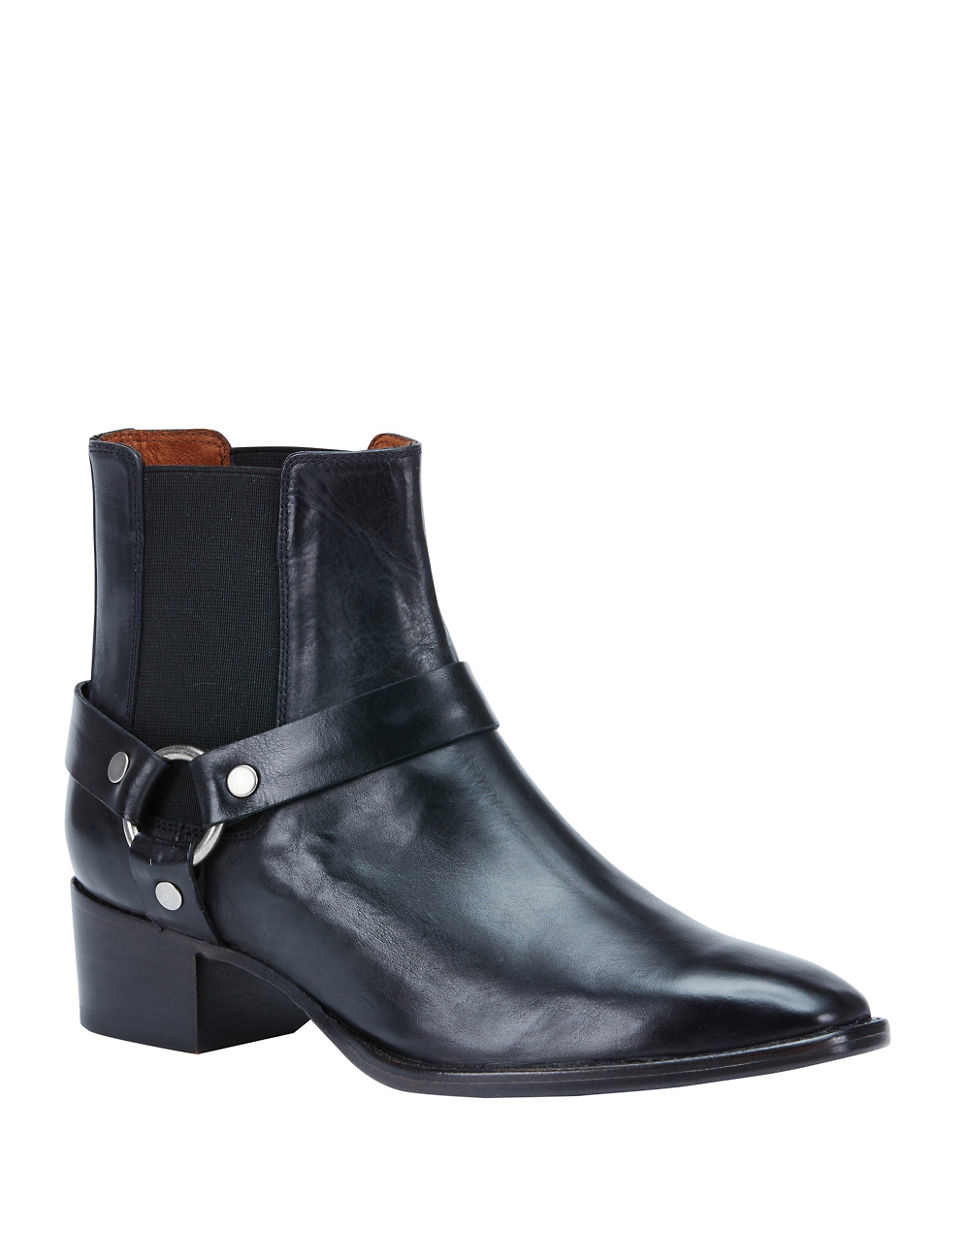 Frye Dara Leather Harness Ankle Boots in Black | Lyst